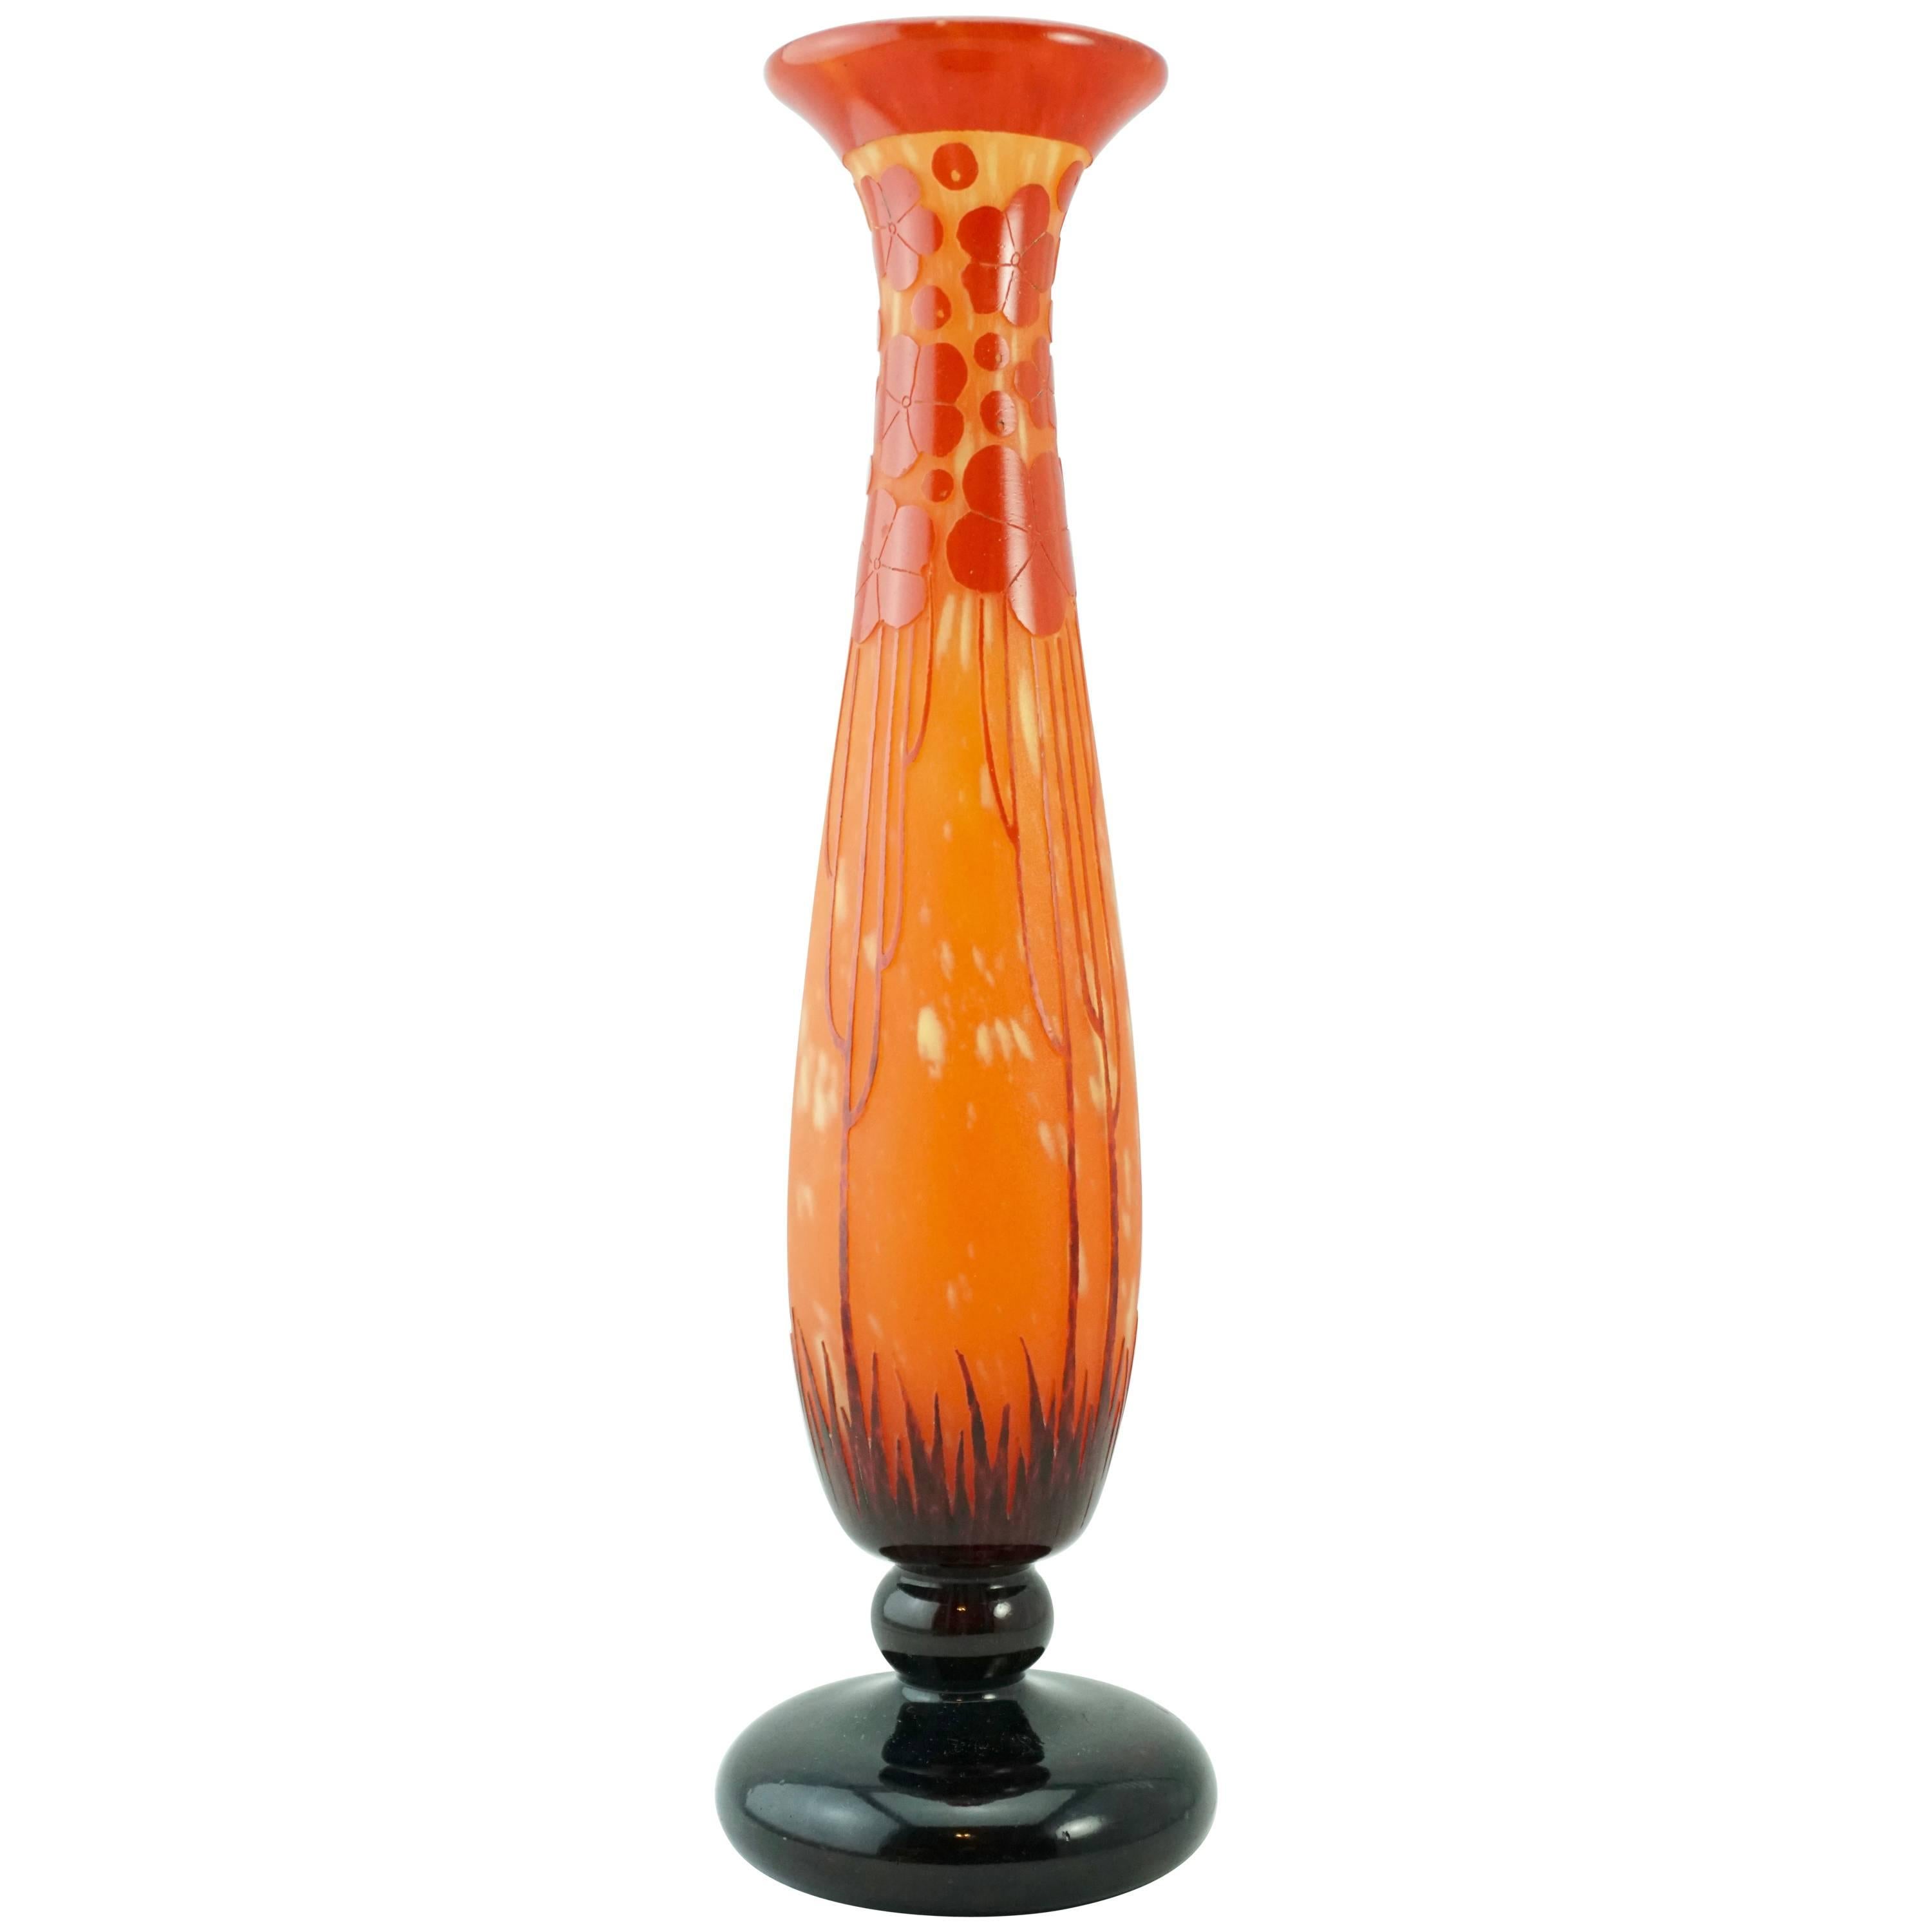 Charles Schneider Le Verre Francais Cardemines Red Cameo Vase For Sale